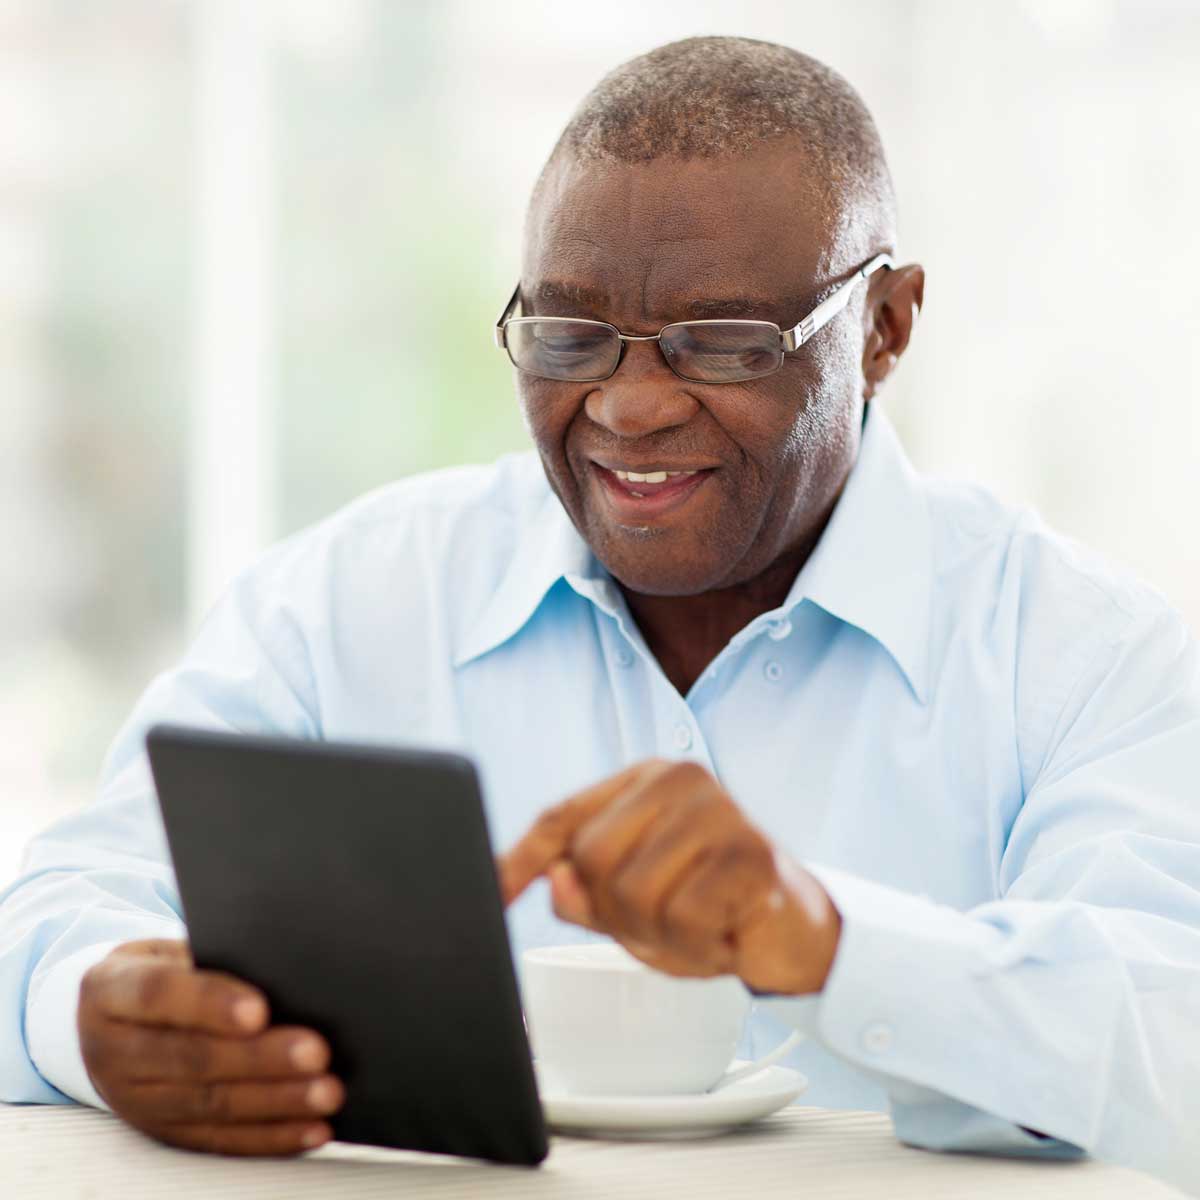 Gentleman reviewing plan information on his tablet